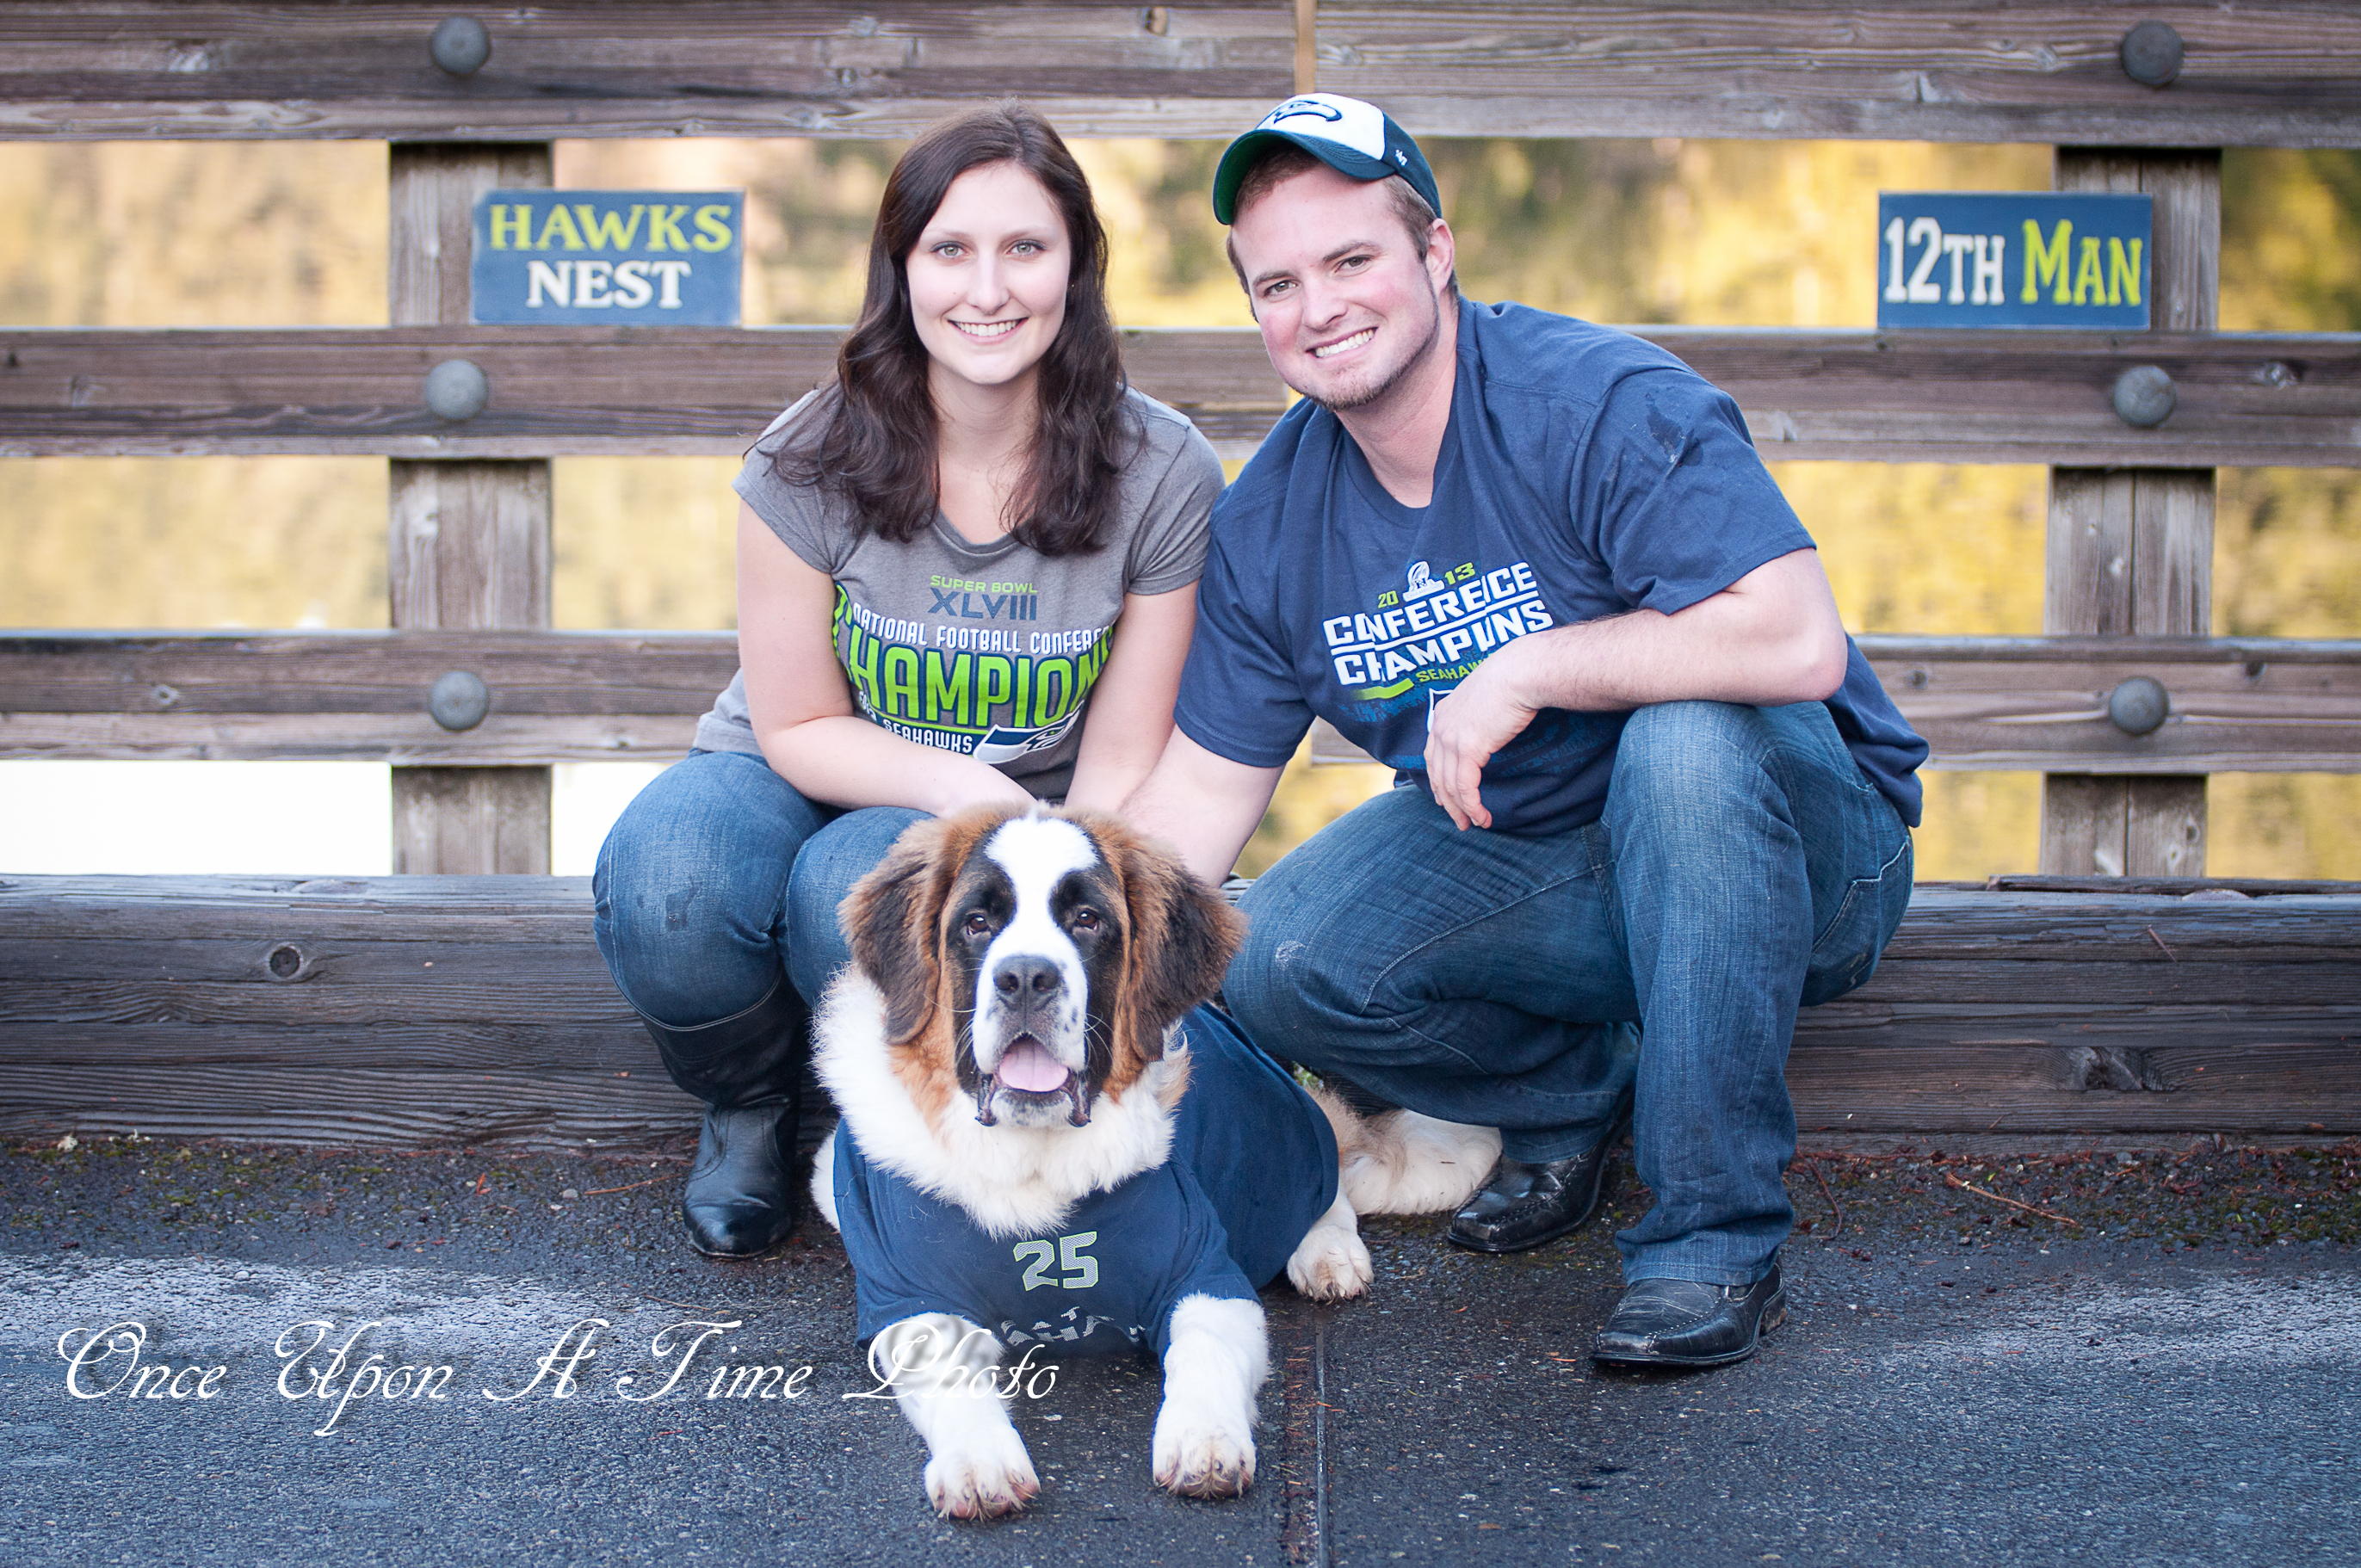 football engagement photos of couple with dog. Seattle Seahawks | bexbernard.com